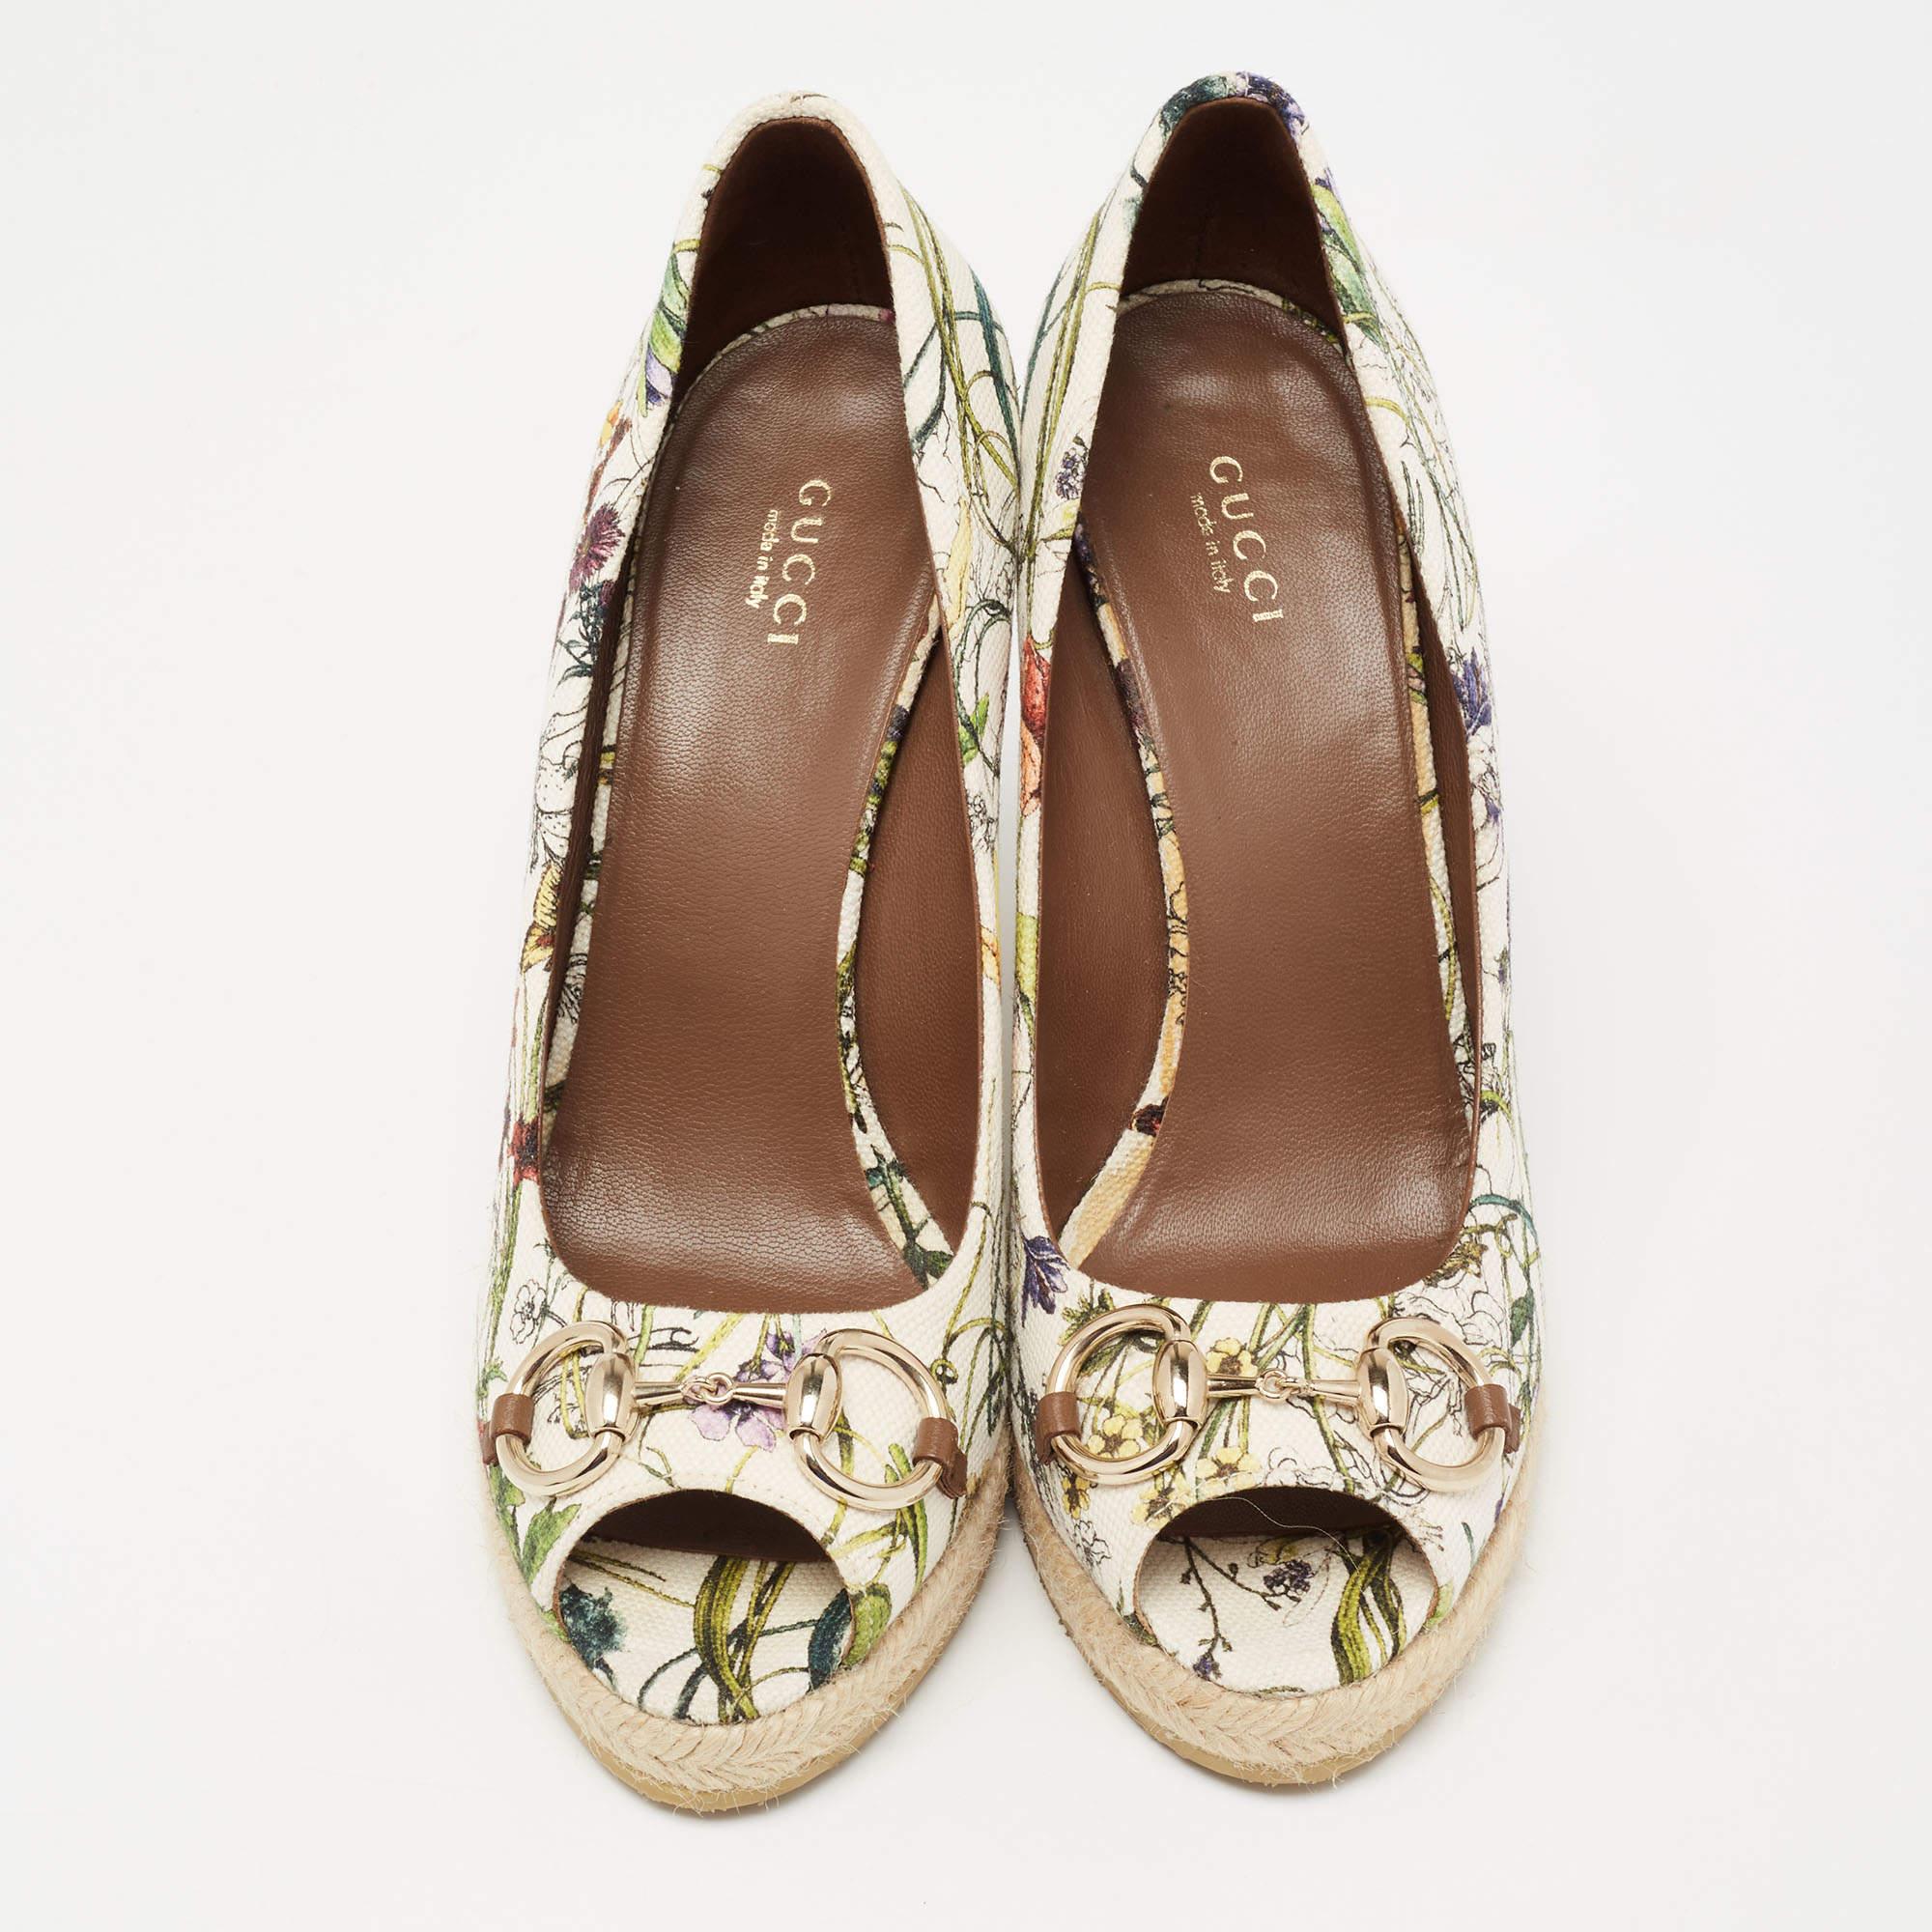 These wedge pumps from Gucci are crafted from canvas in a multicolored, floral print. They feature the signature Horsebit accents on the vamps, smooth insoles, and durable rubber soles for a comfortable walk.

